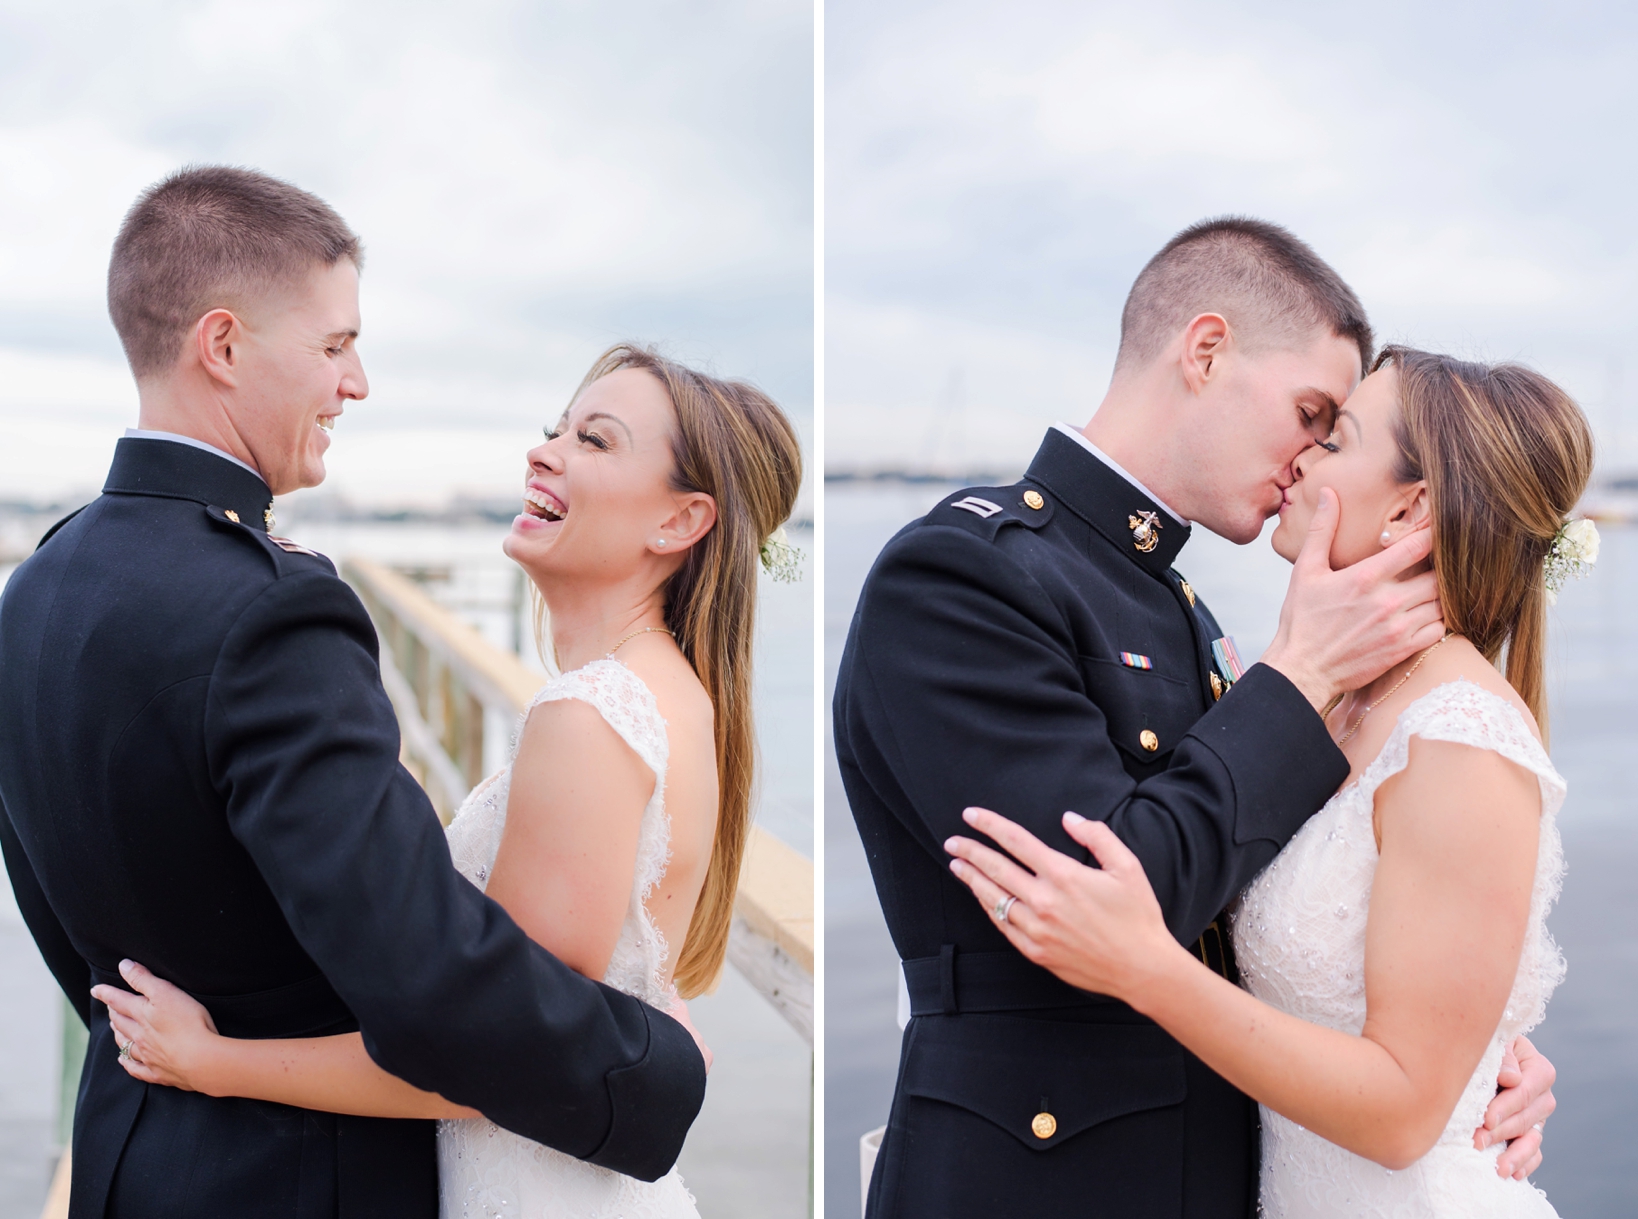 Candid moment of a bride and groom during the portraits by Sarah & Ben Photography